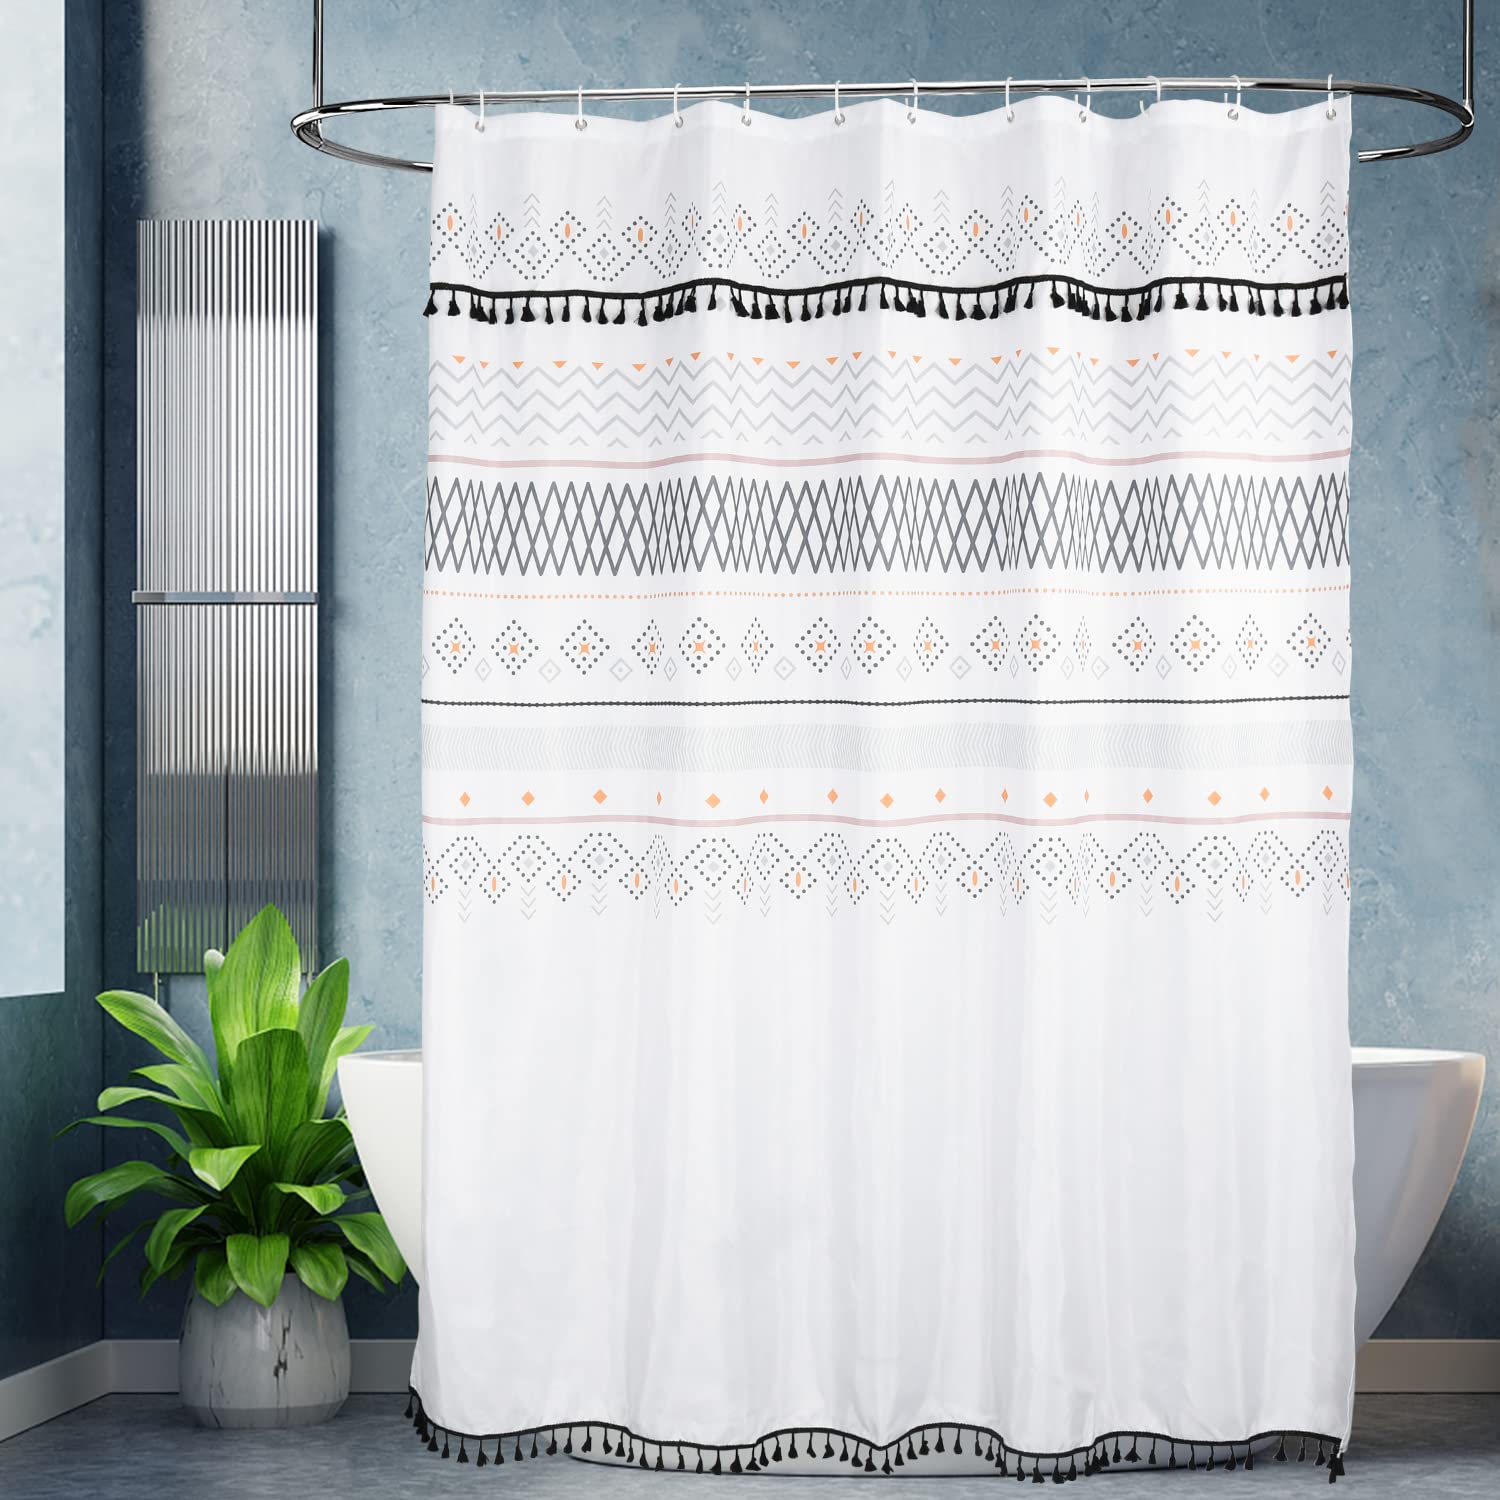 Book Cover JRing Grey Shower Curtain, Waterproof Design, Quick-Drying, Shower Curtains Set for Bathroom, Decorative Bathroom Accessories 72x72, Durable and Washable with 12 Hooks